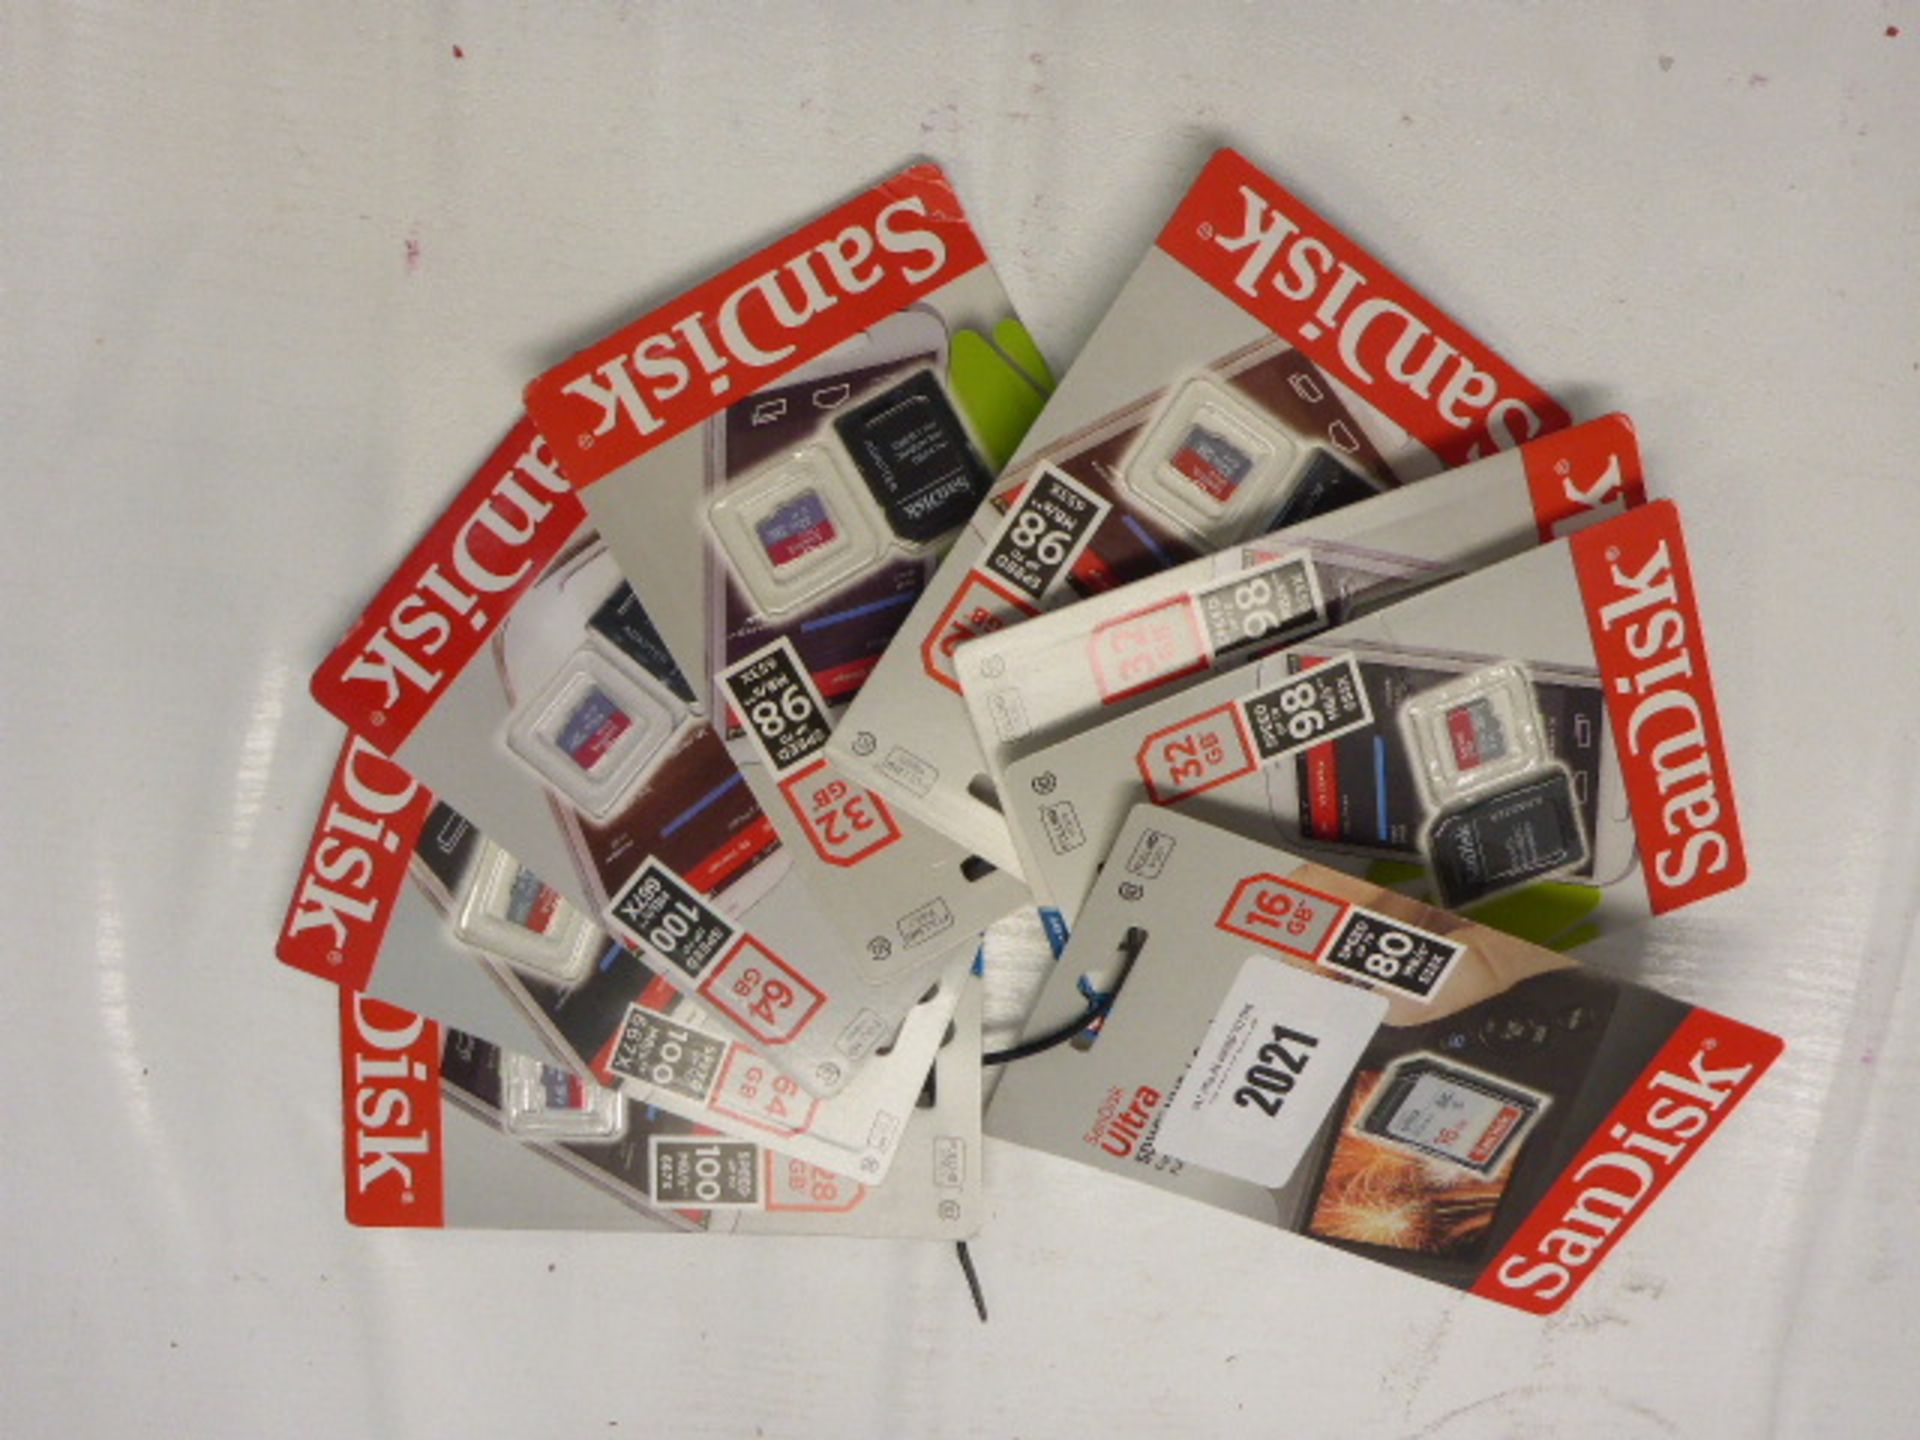 8x SanDisk SD and MicroSD cards in various capacities